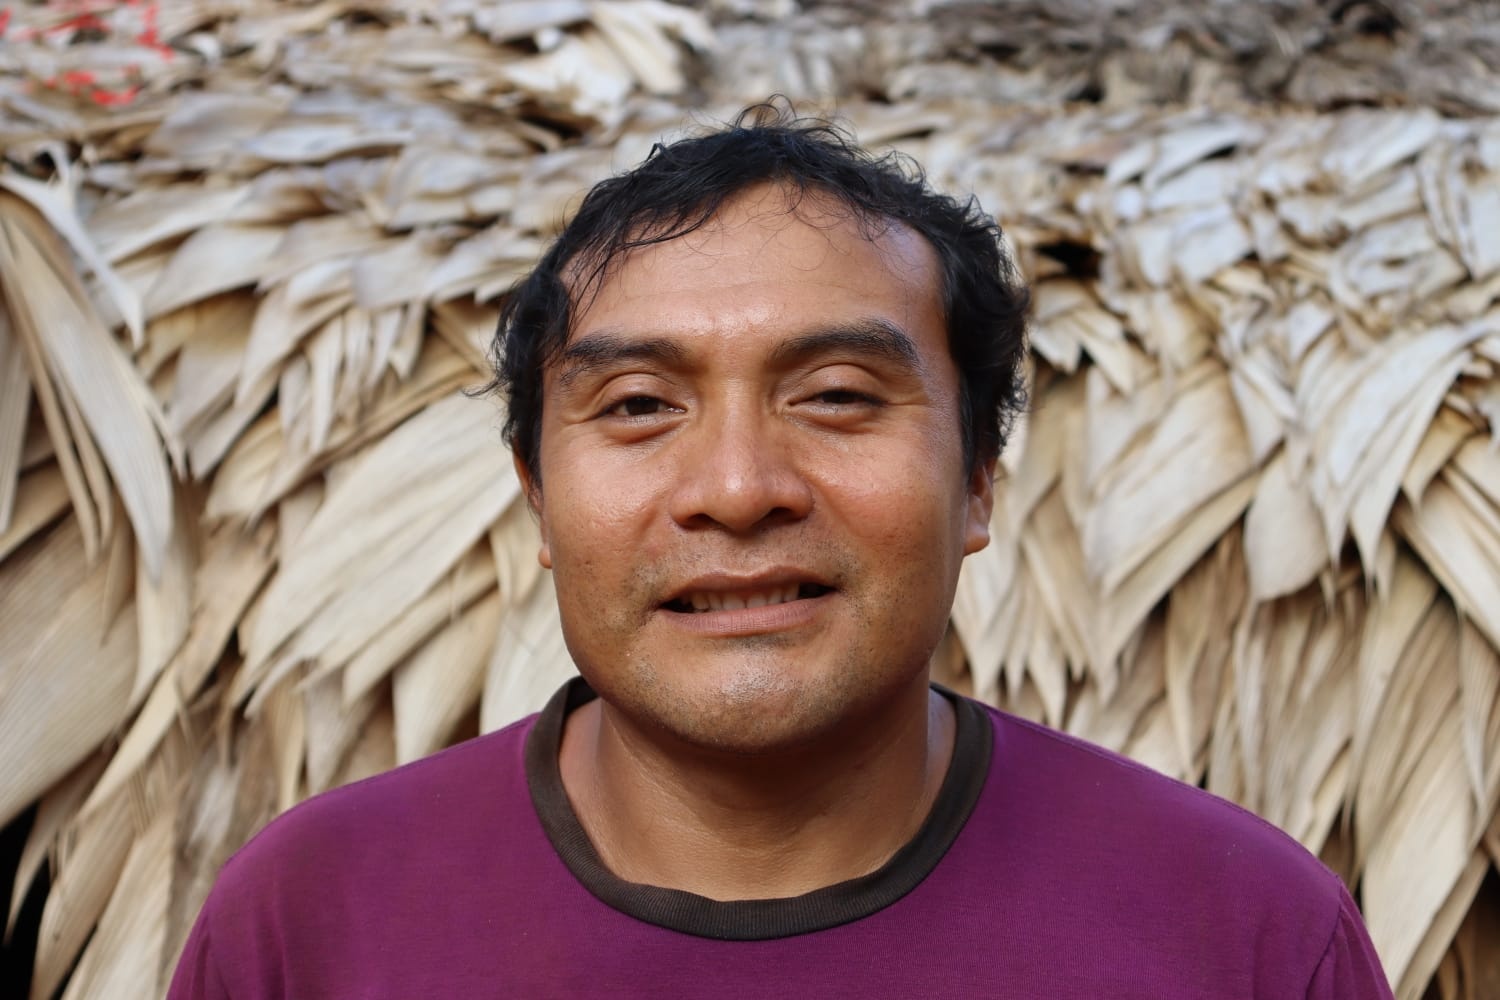 A portrait of artist Edmar Tokorino. An Indigenous Yanomami man, Edmar wears a wine-colored shirt and smiles with his mouth slightly cracked open. He stands against a background of overlapping, dried leaves that recalls a thatched roof or wall. 